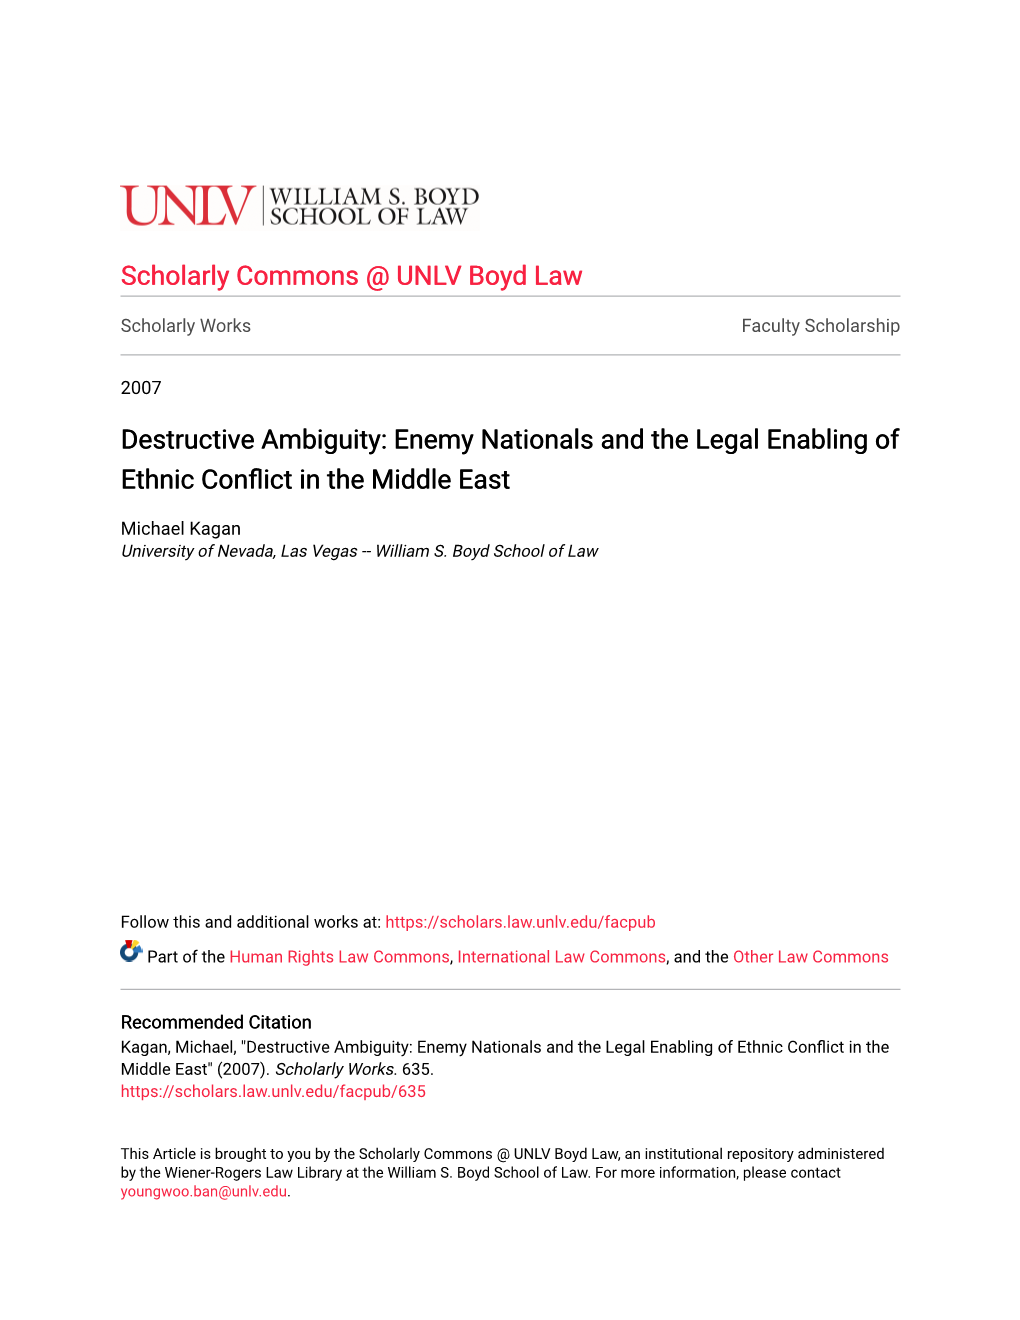 Enemy Nationals and the Legal Enabling of Ethnic Conflict in the Middle East